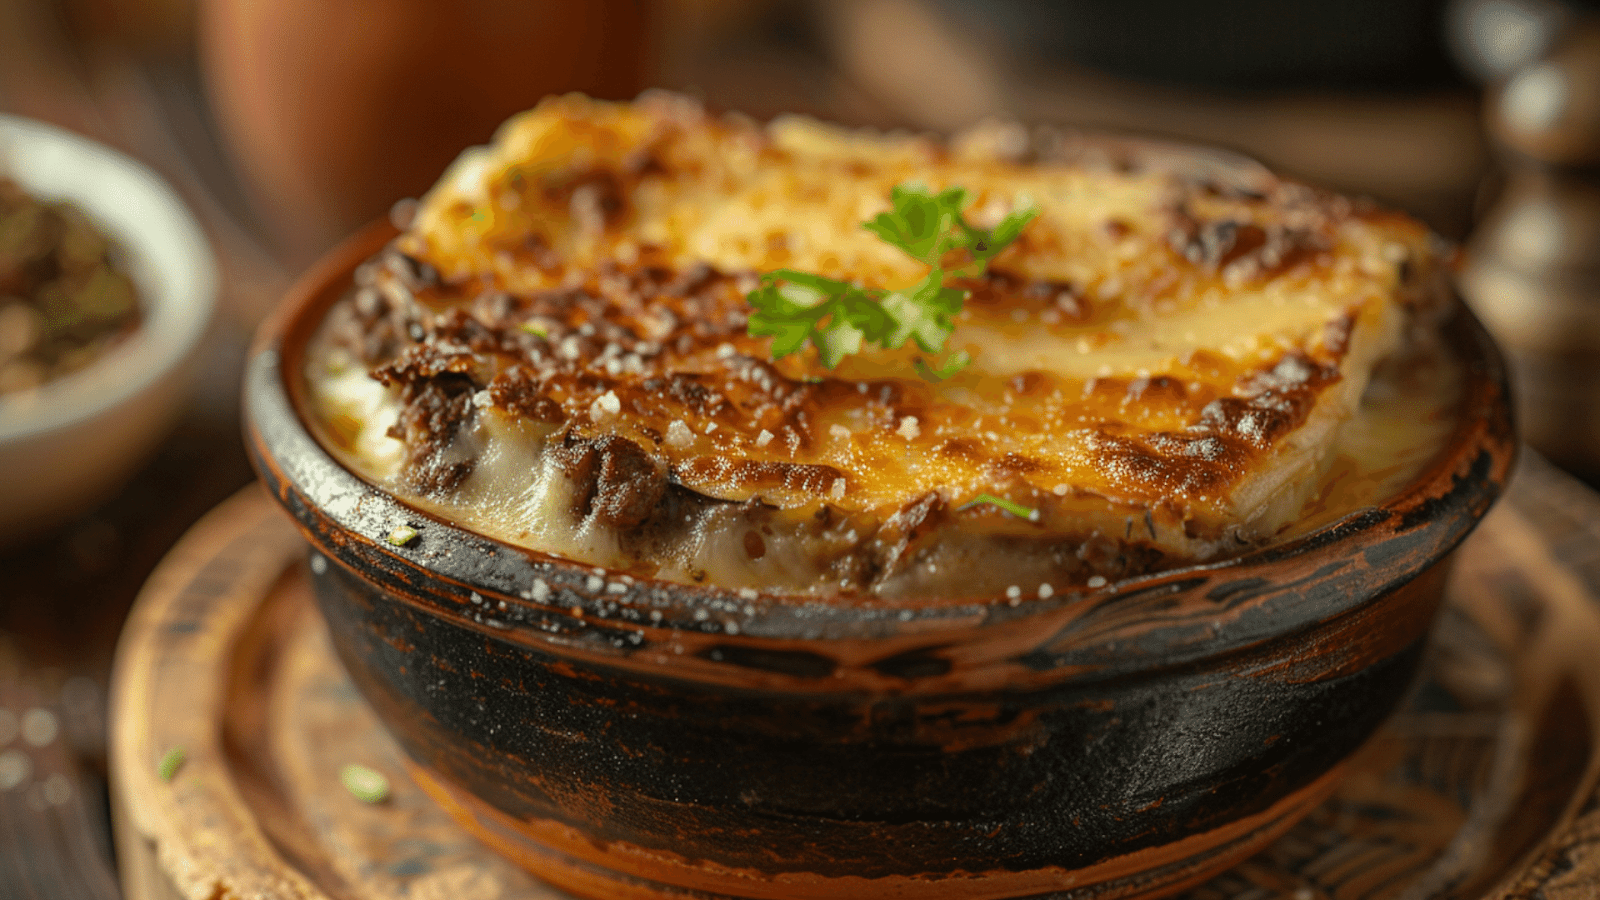 Baked Greek moussaka with layers of eggplant and minced meat, a hearty staple of food in Europe